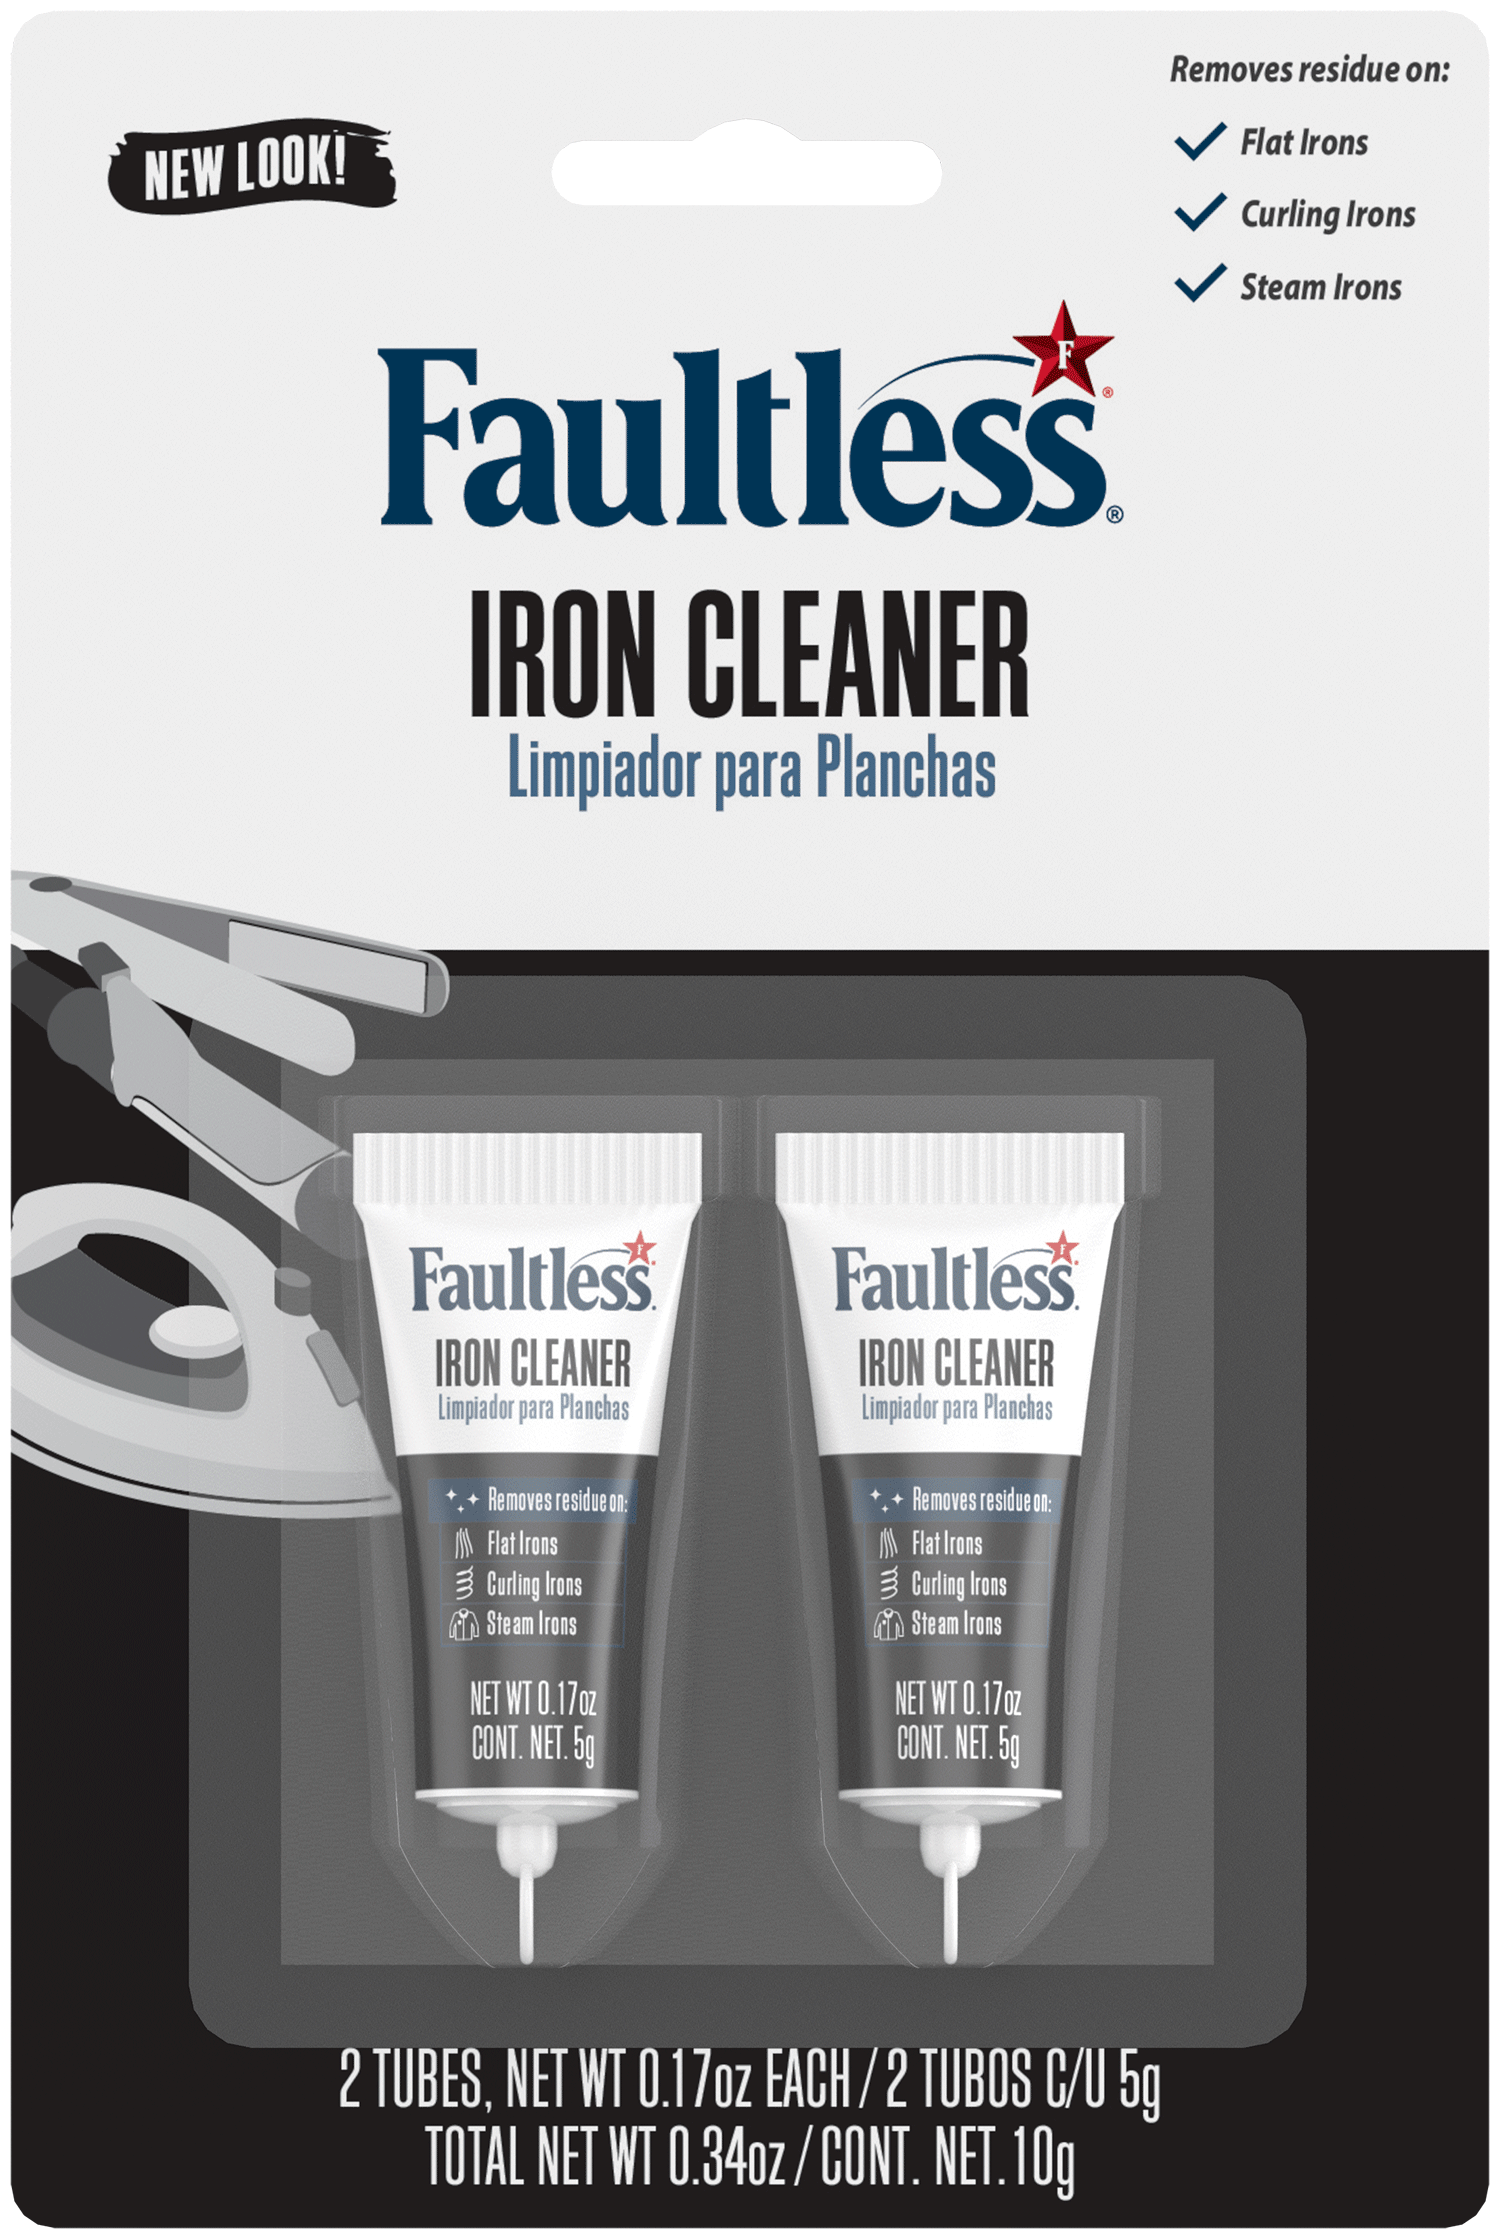 https://www.faultless.com/wp-content/uploads/2021/10/40105_5-543-20_FS_IronCleaner_0.34oz_Card_1219_R2_Rev1_CF-1_small.png